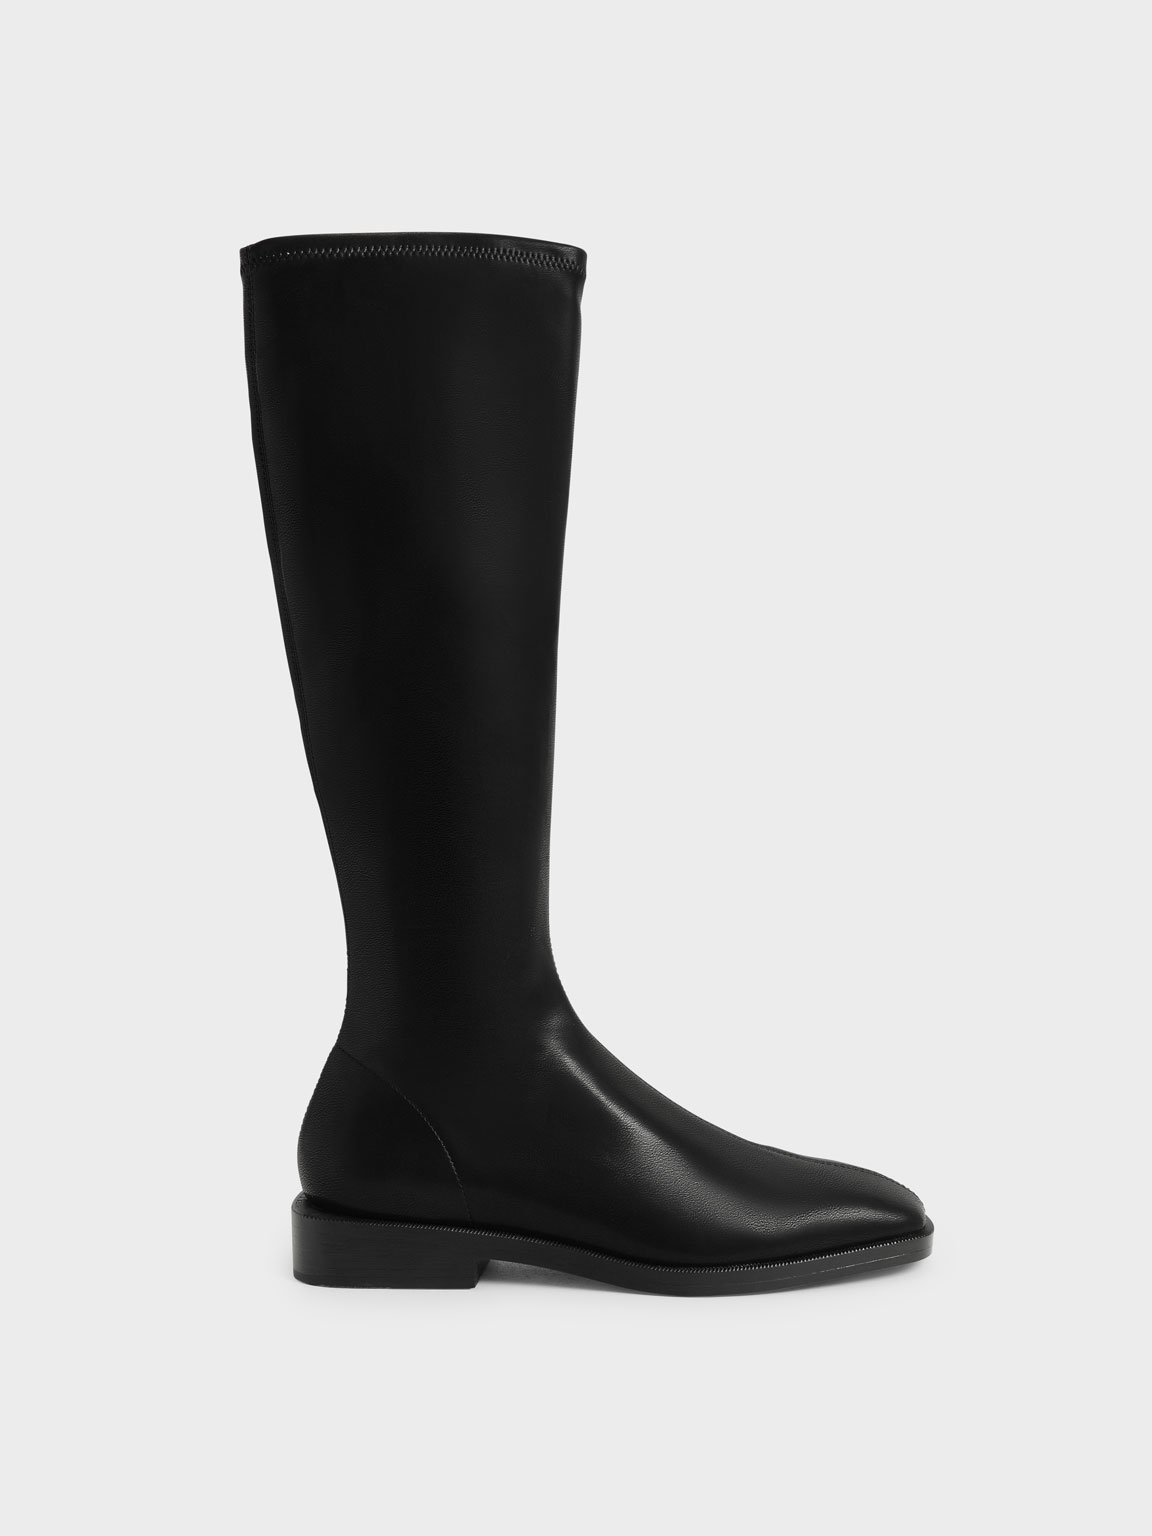 Black Knee High Flat Boots - CHARLES & KEITH US